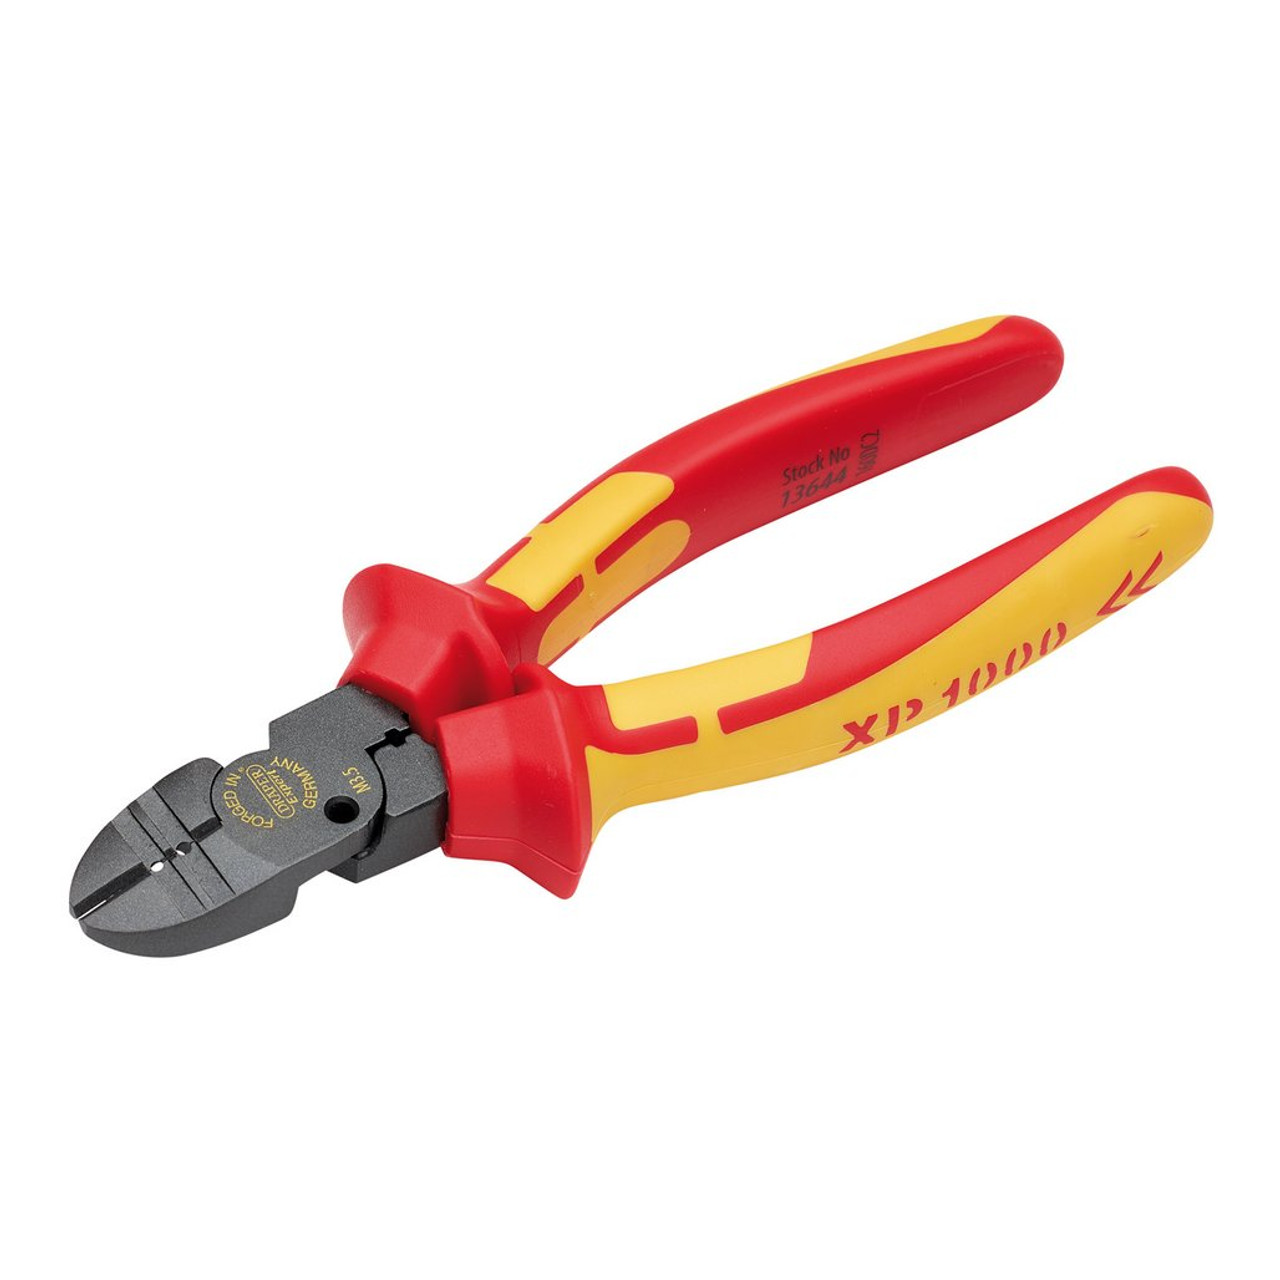 XP1000® VDE 4-in-1 Combination Cutter, 160mm